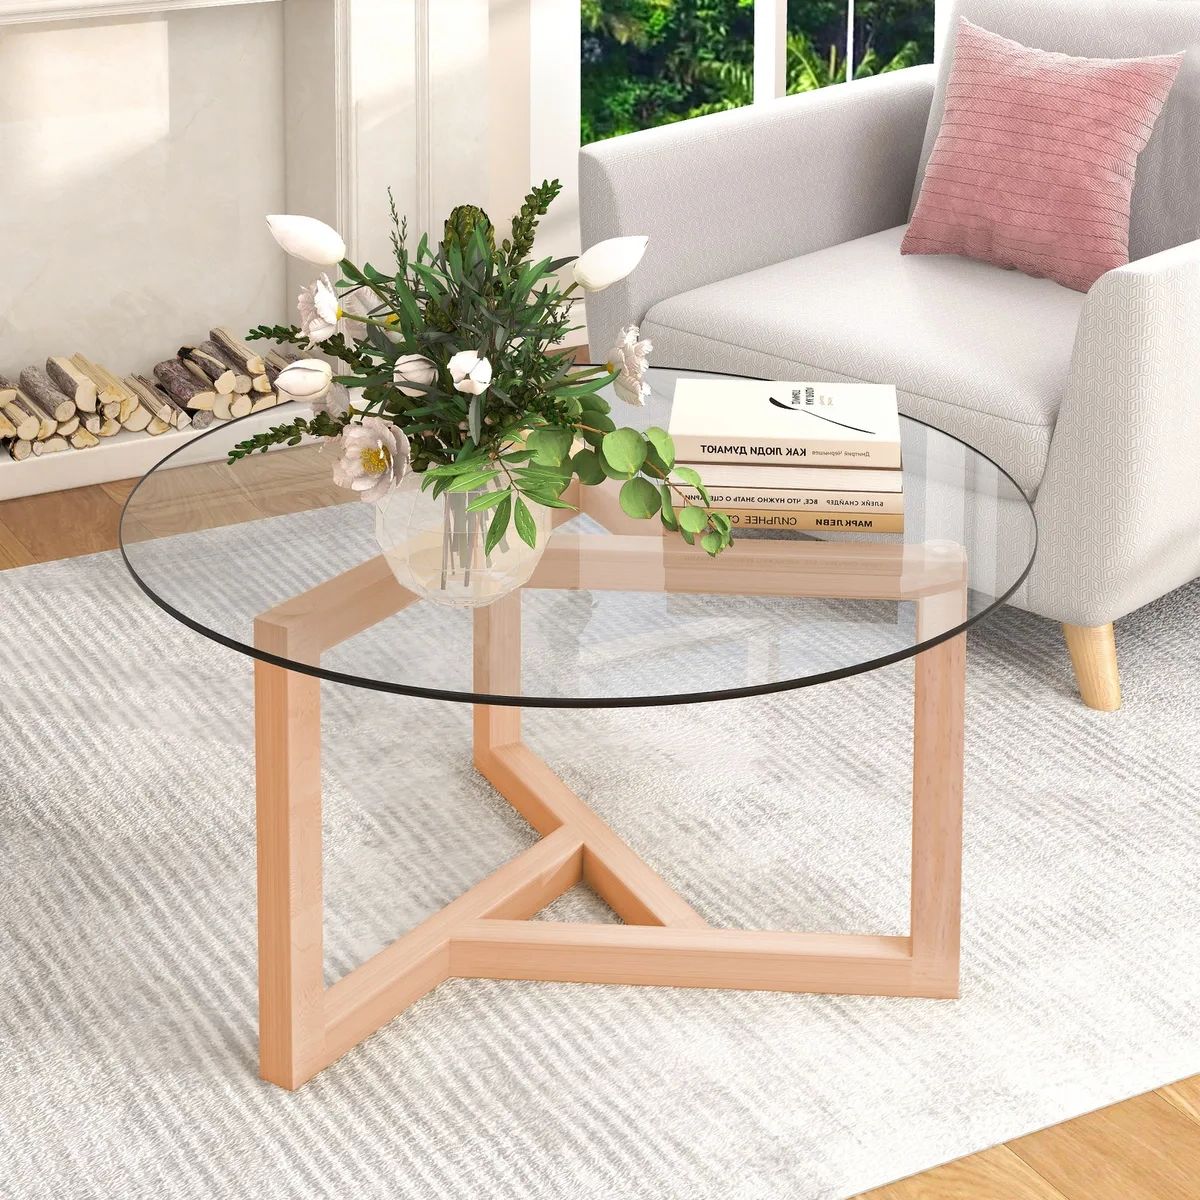 Ebay Throughout Latest Wood Tempered Glass Top Coffee Tables (View 8 of 10)